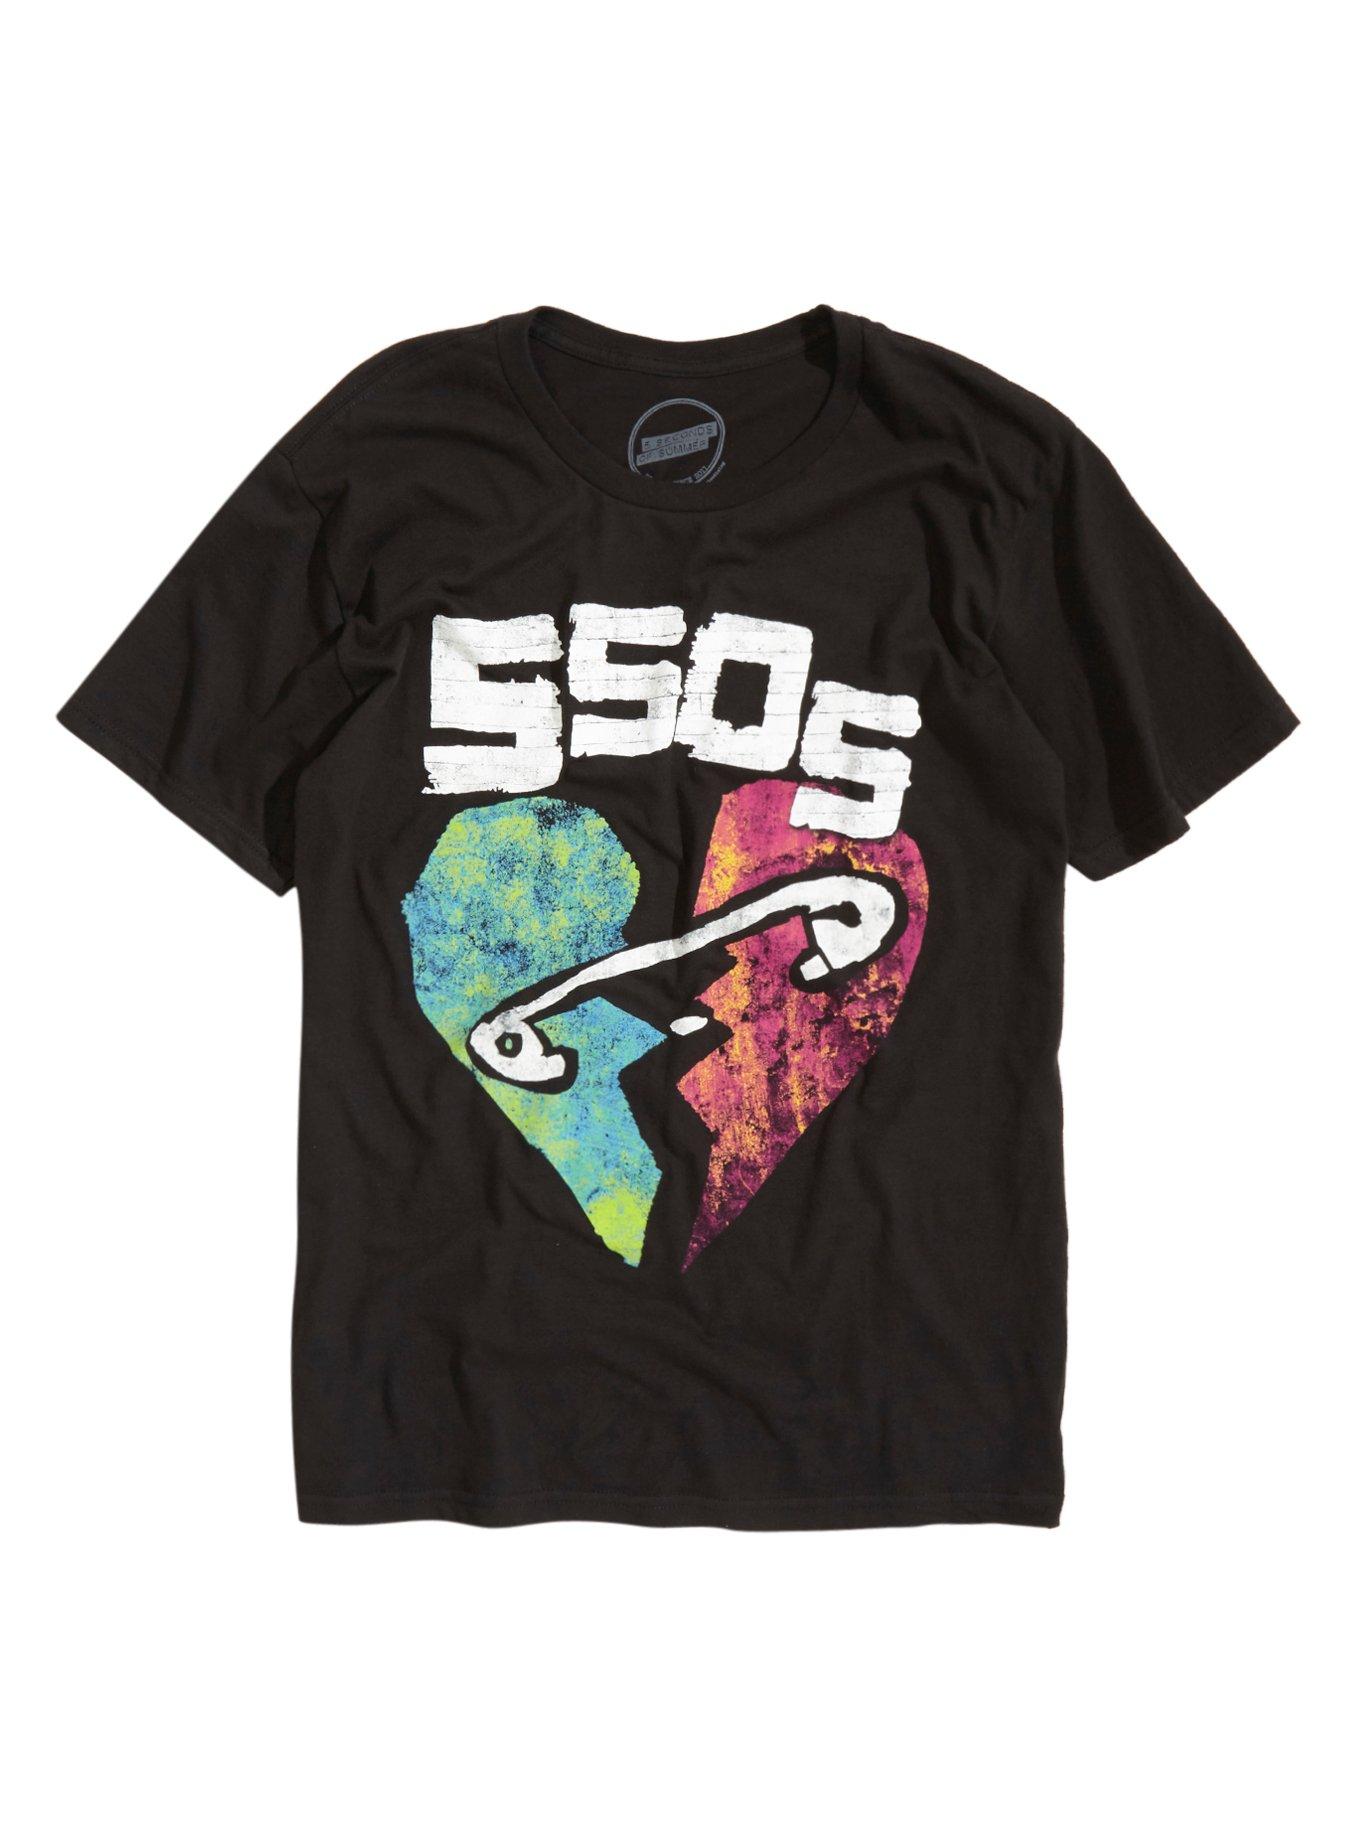 Five Seconds Of Summer Safety Pin Heart T-Shirt, BLACK, hi-res